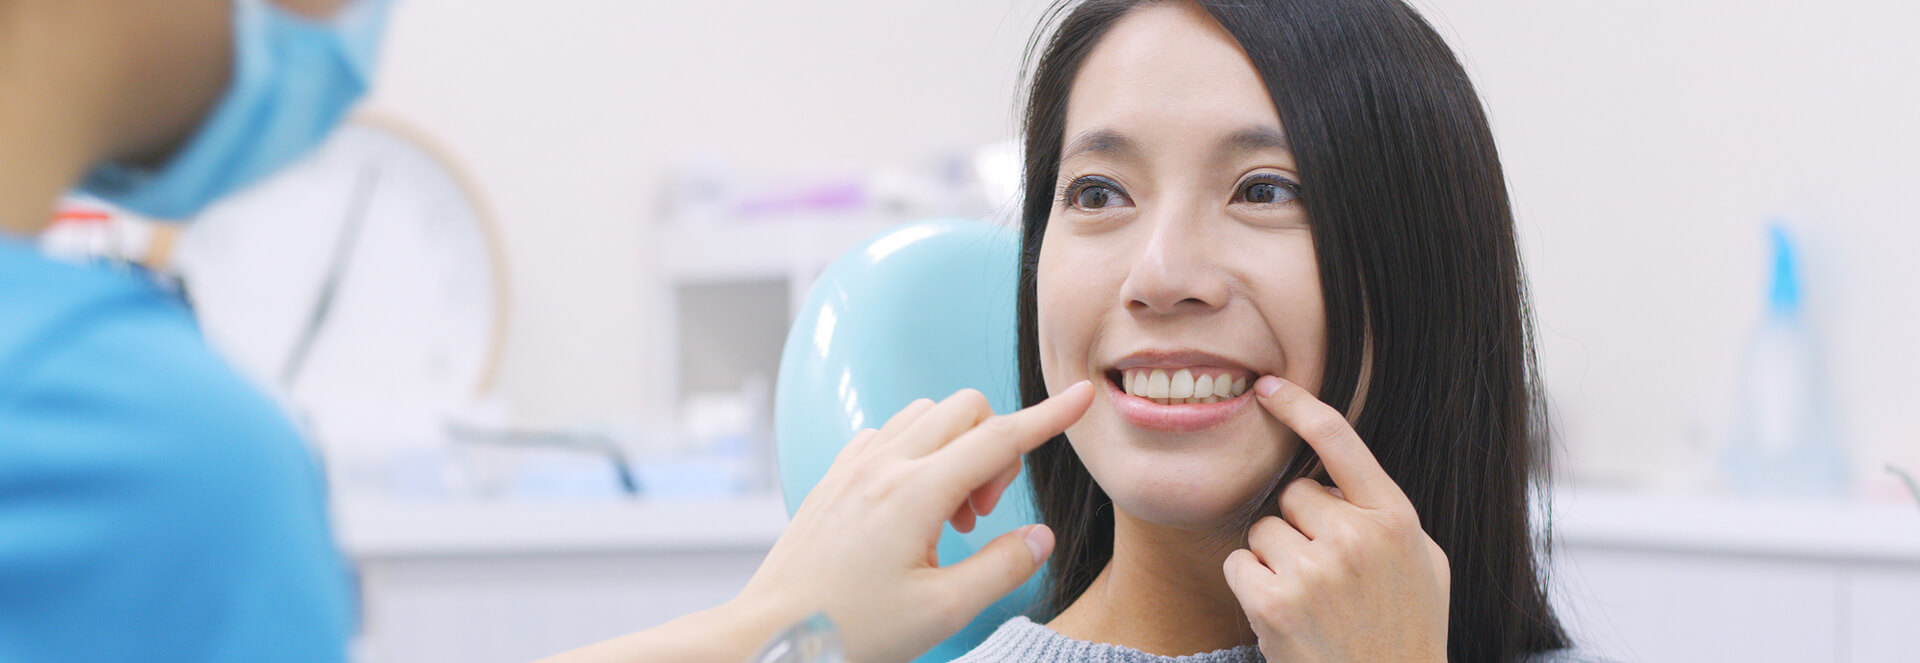 Woman pointing at her teeth to show dental implants